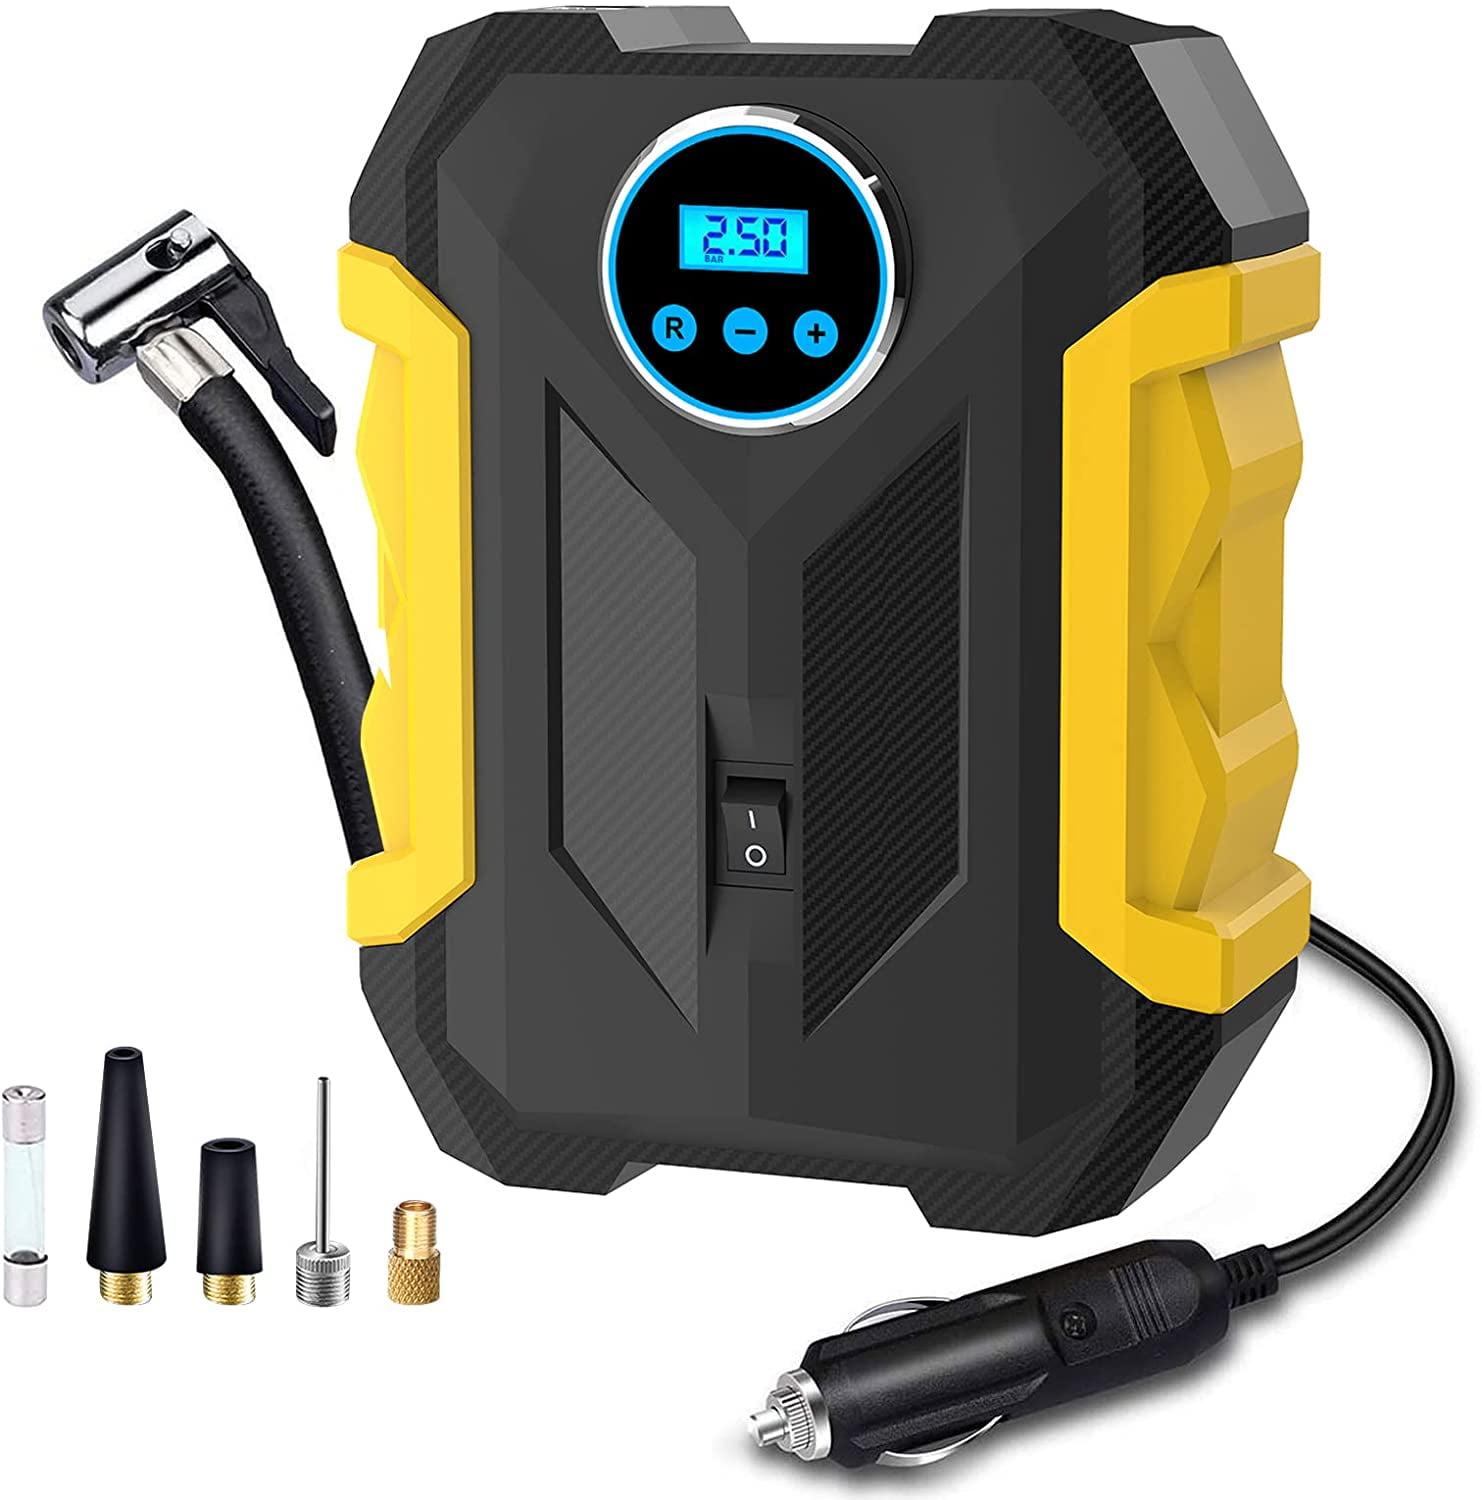 Portable Air Compressor Tire Inflator with Tire Repair Kit - 12V